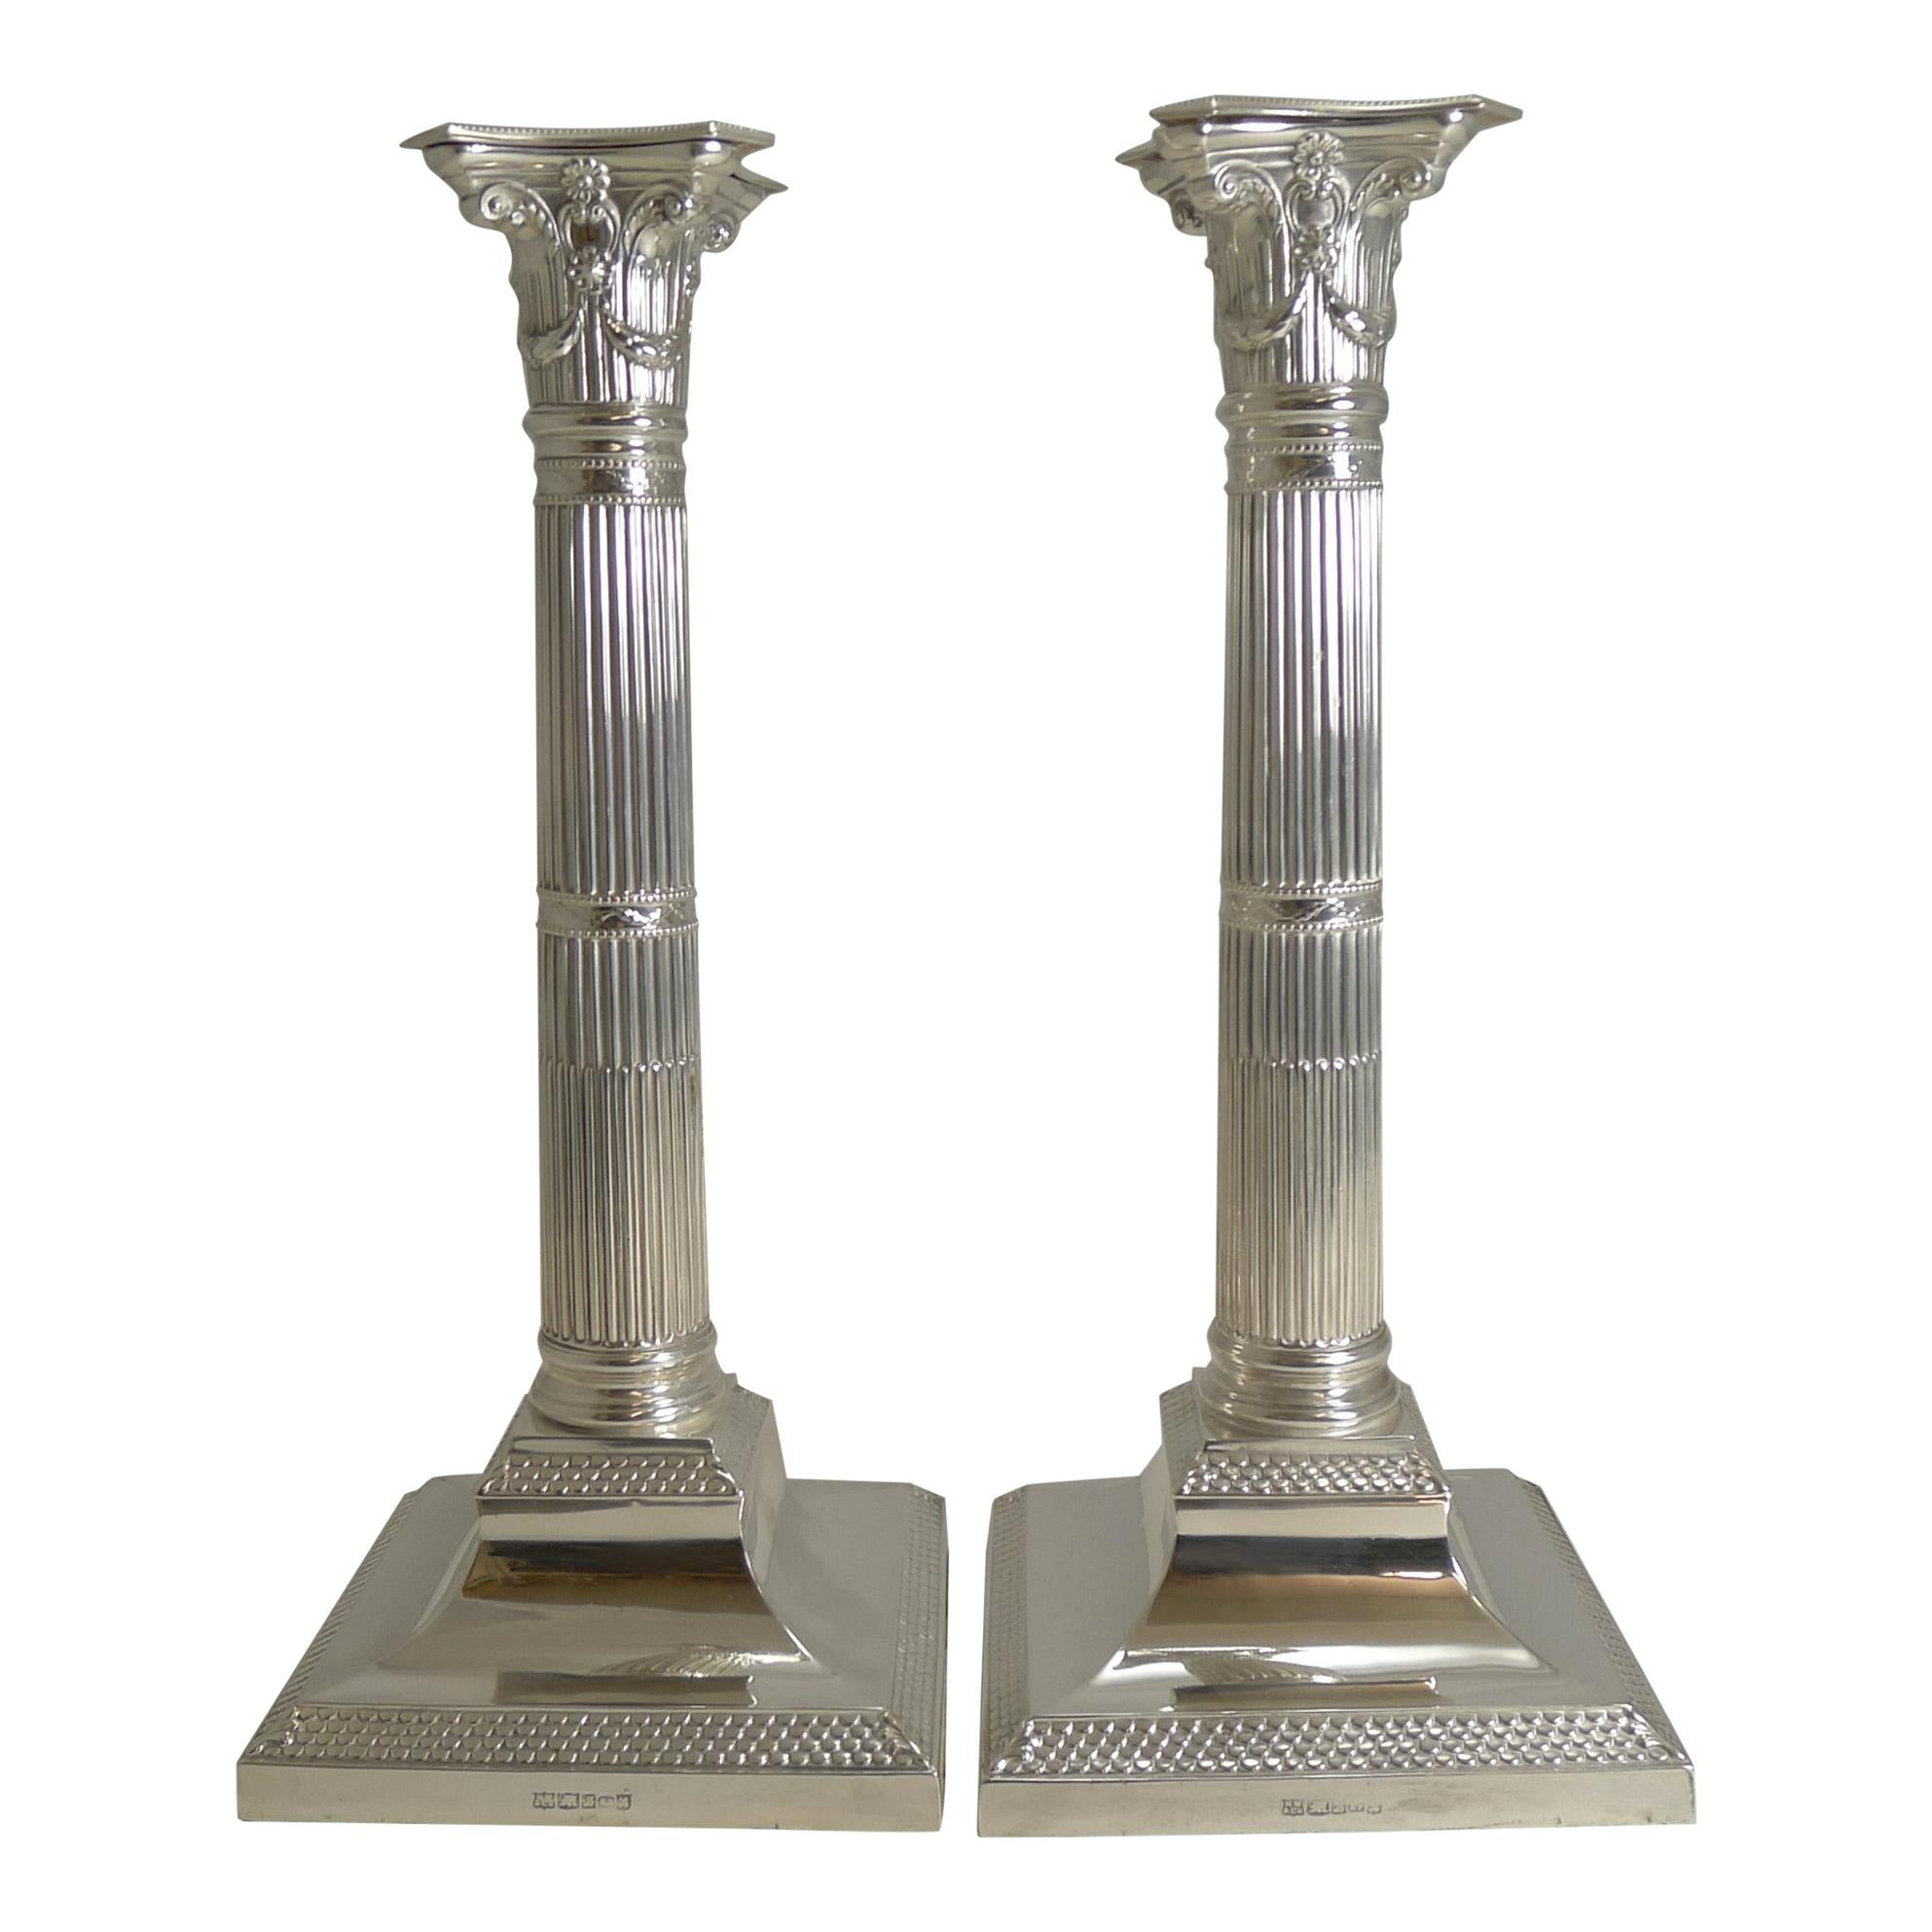 Pair of Antique English Silver Plated Candlesticks by Mappin & Webb, circa 1890